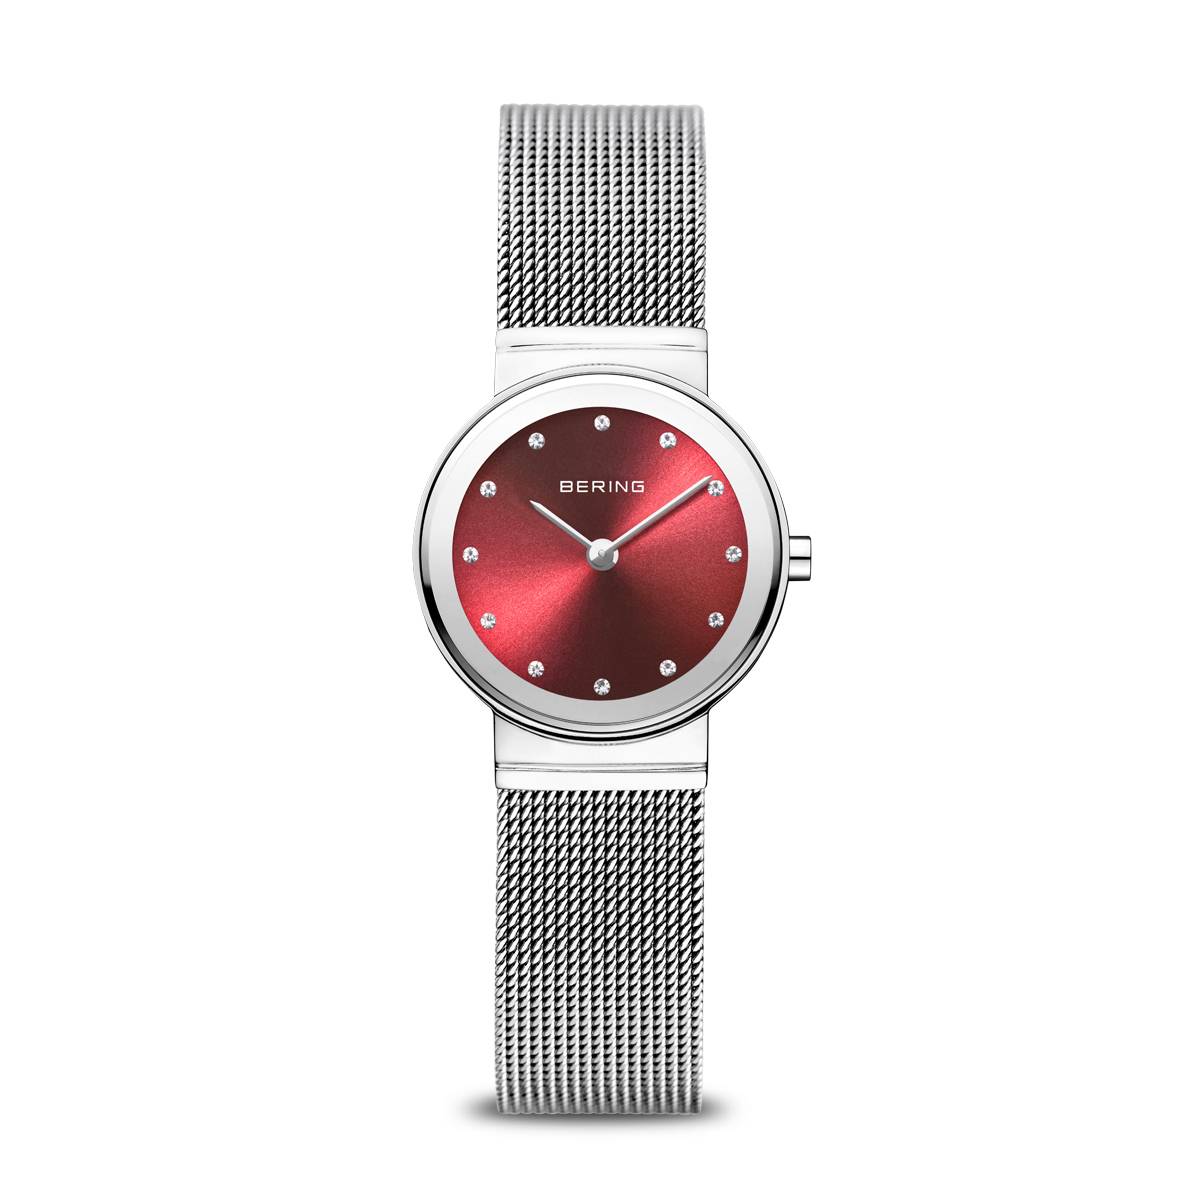 Ladies Bering watch with red dial - Carathea jewellers